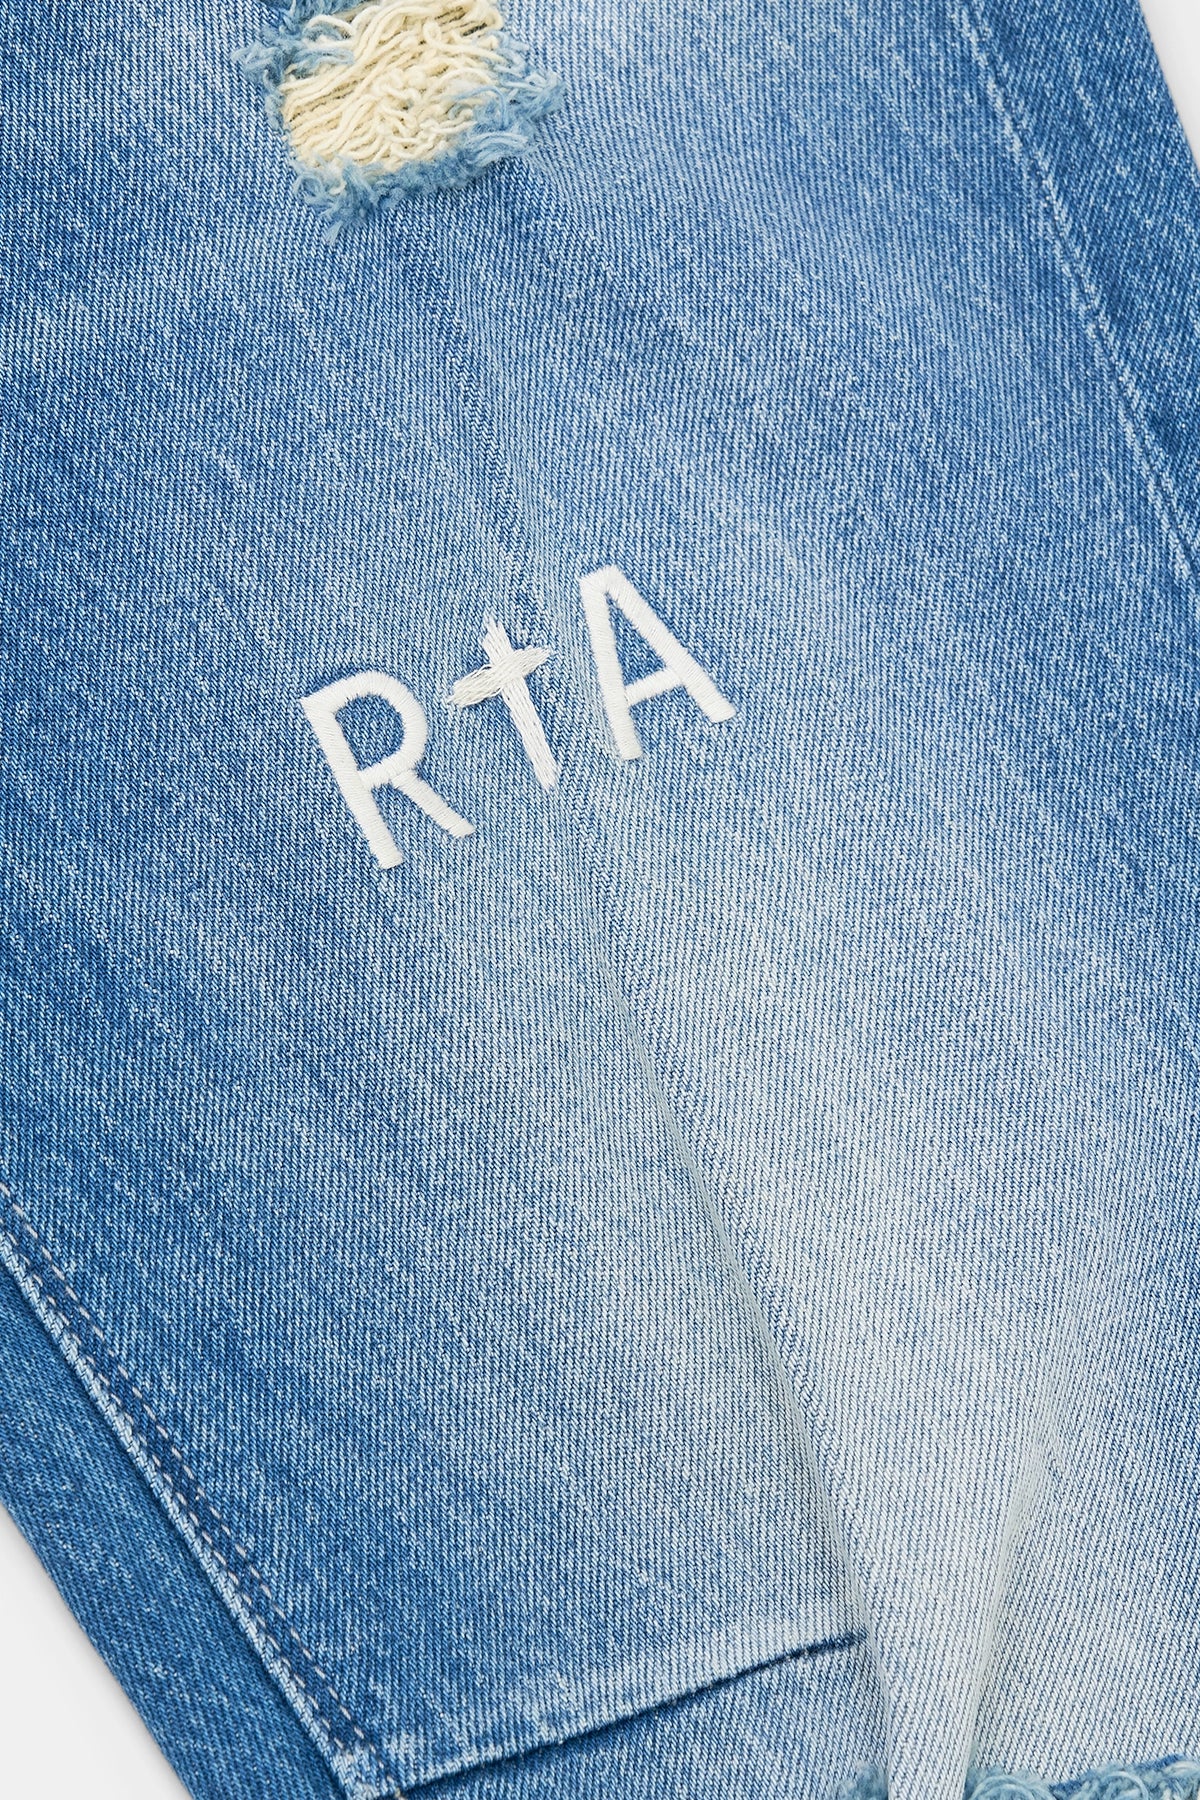 Purchase Stylish Ripped Jeans for Men - RTA Collection